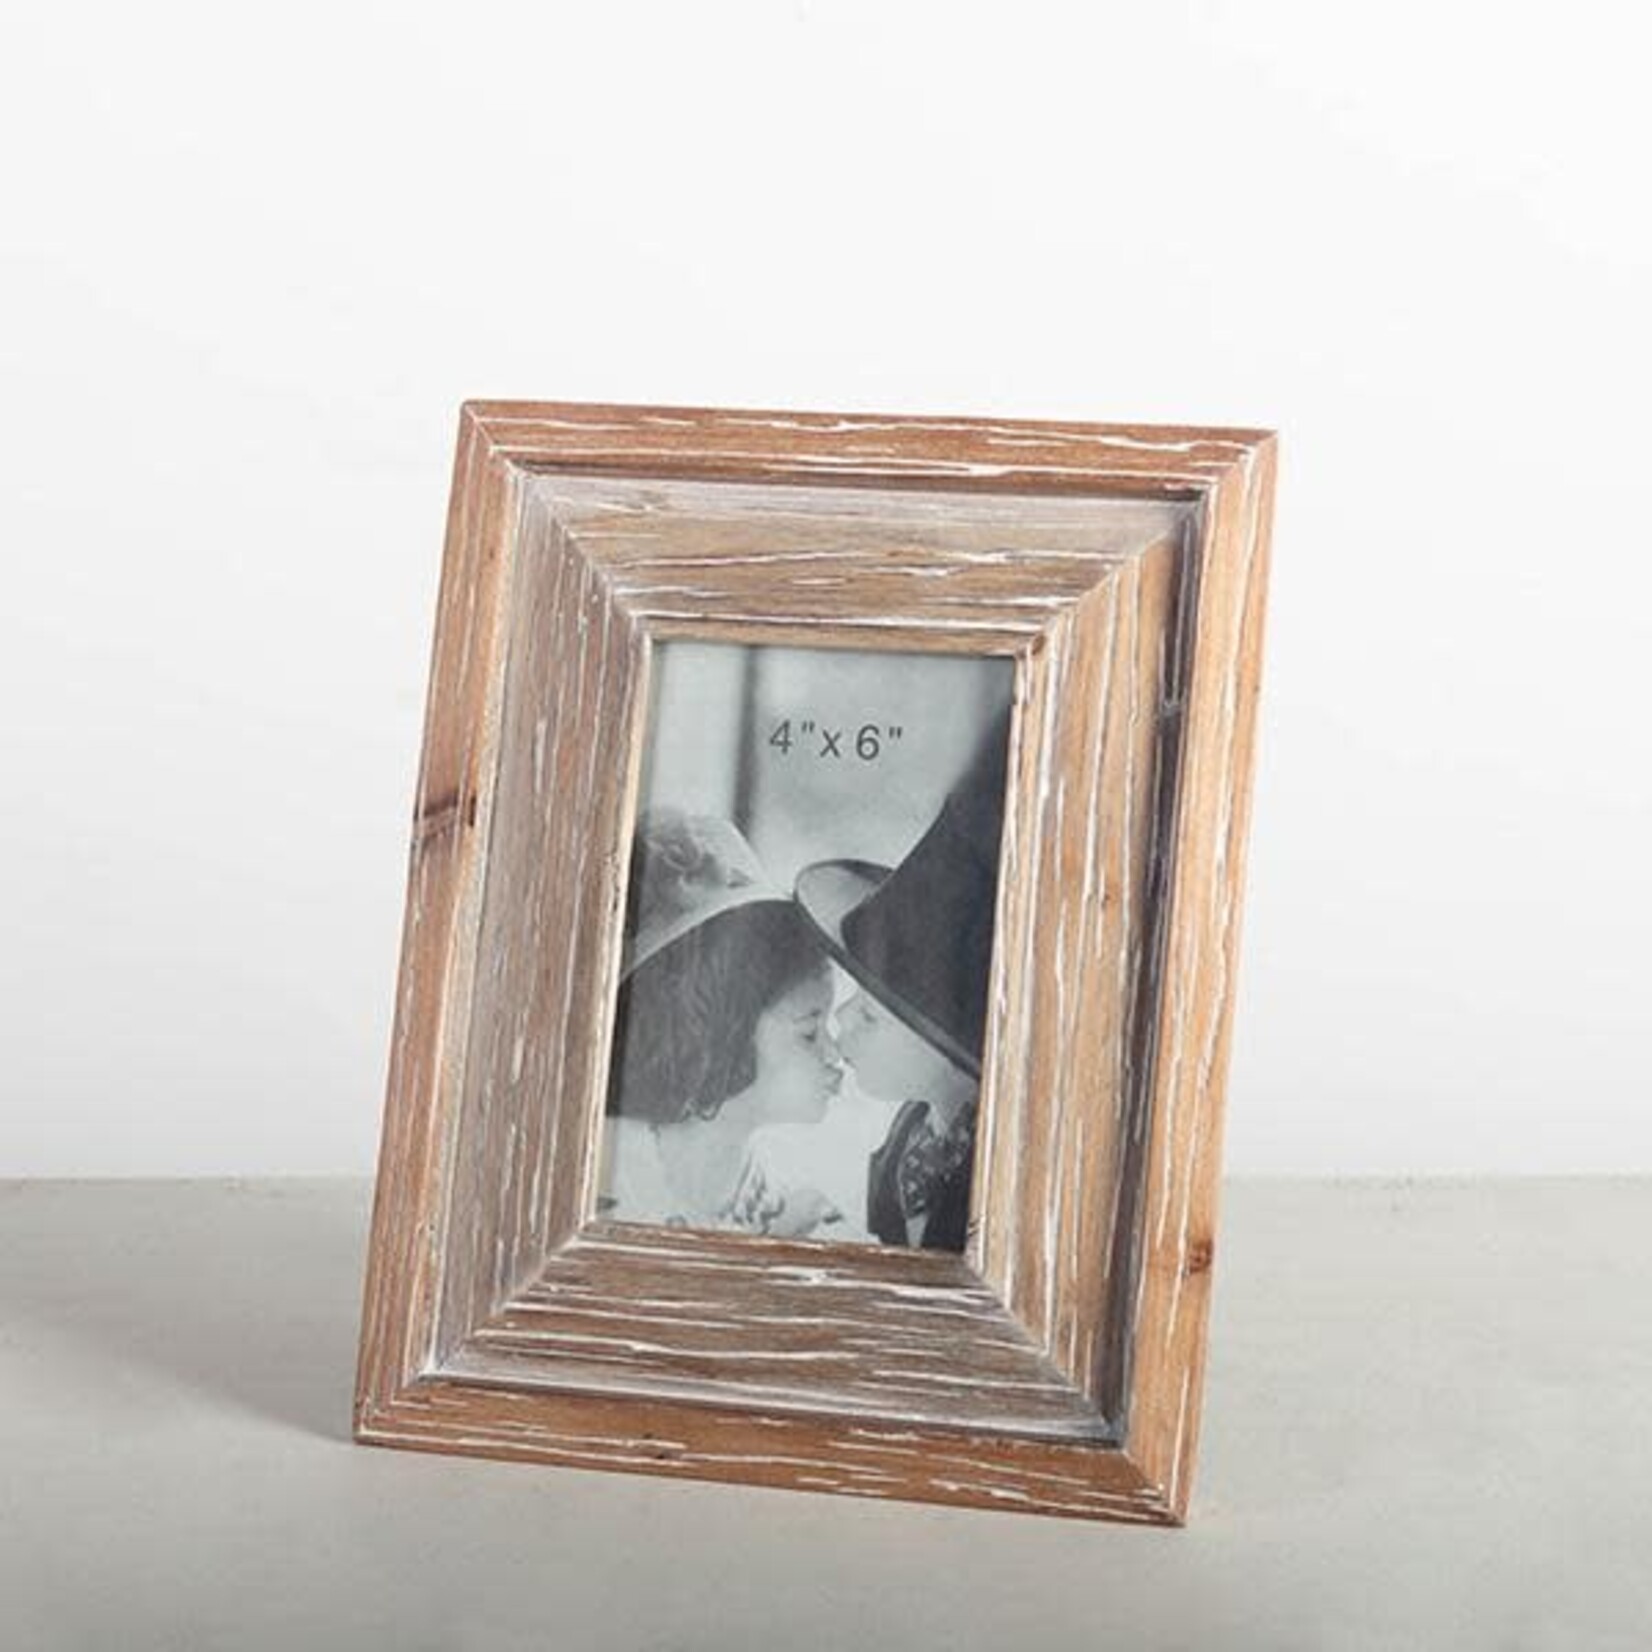 Forpost Trade Natural Wood Picture Frame - 4"x6"